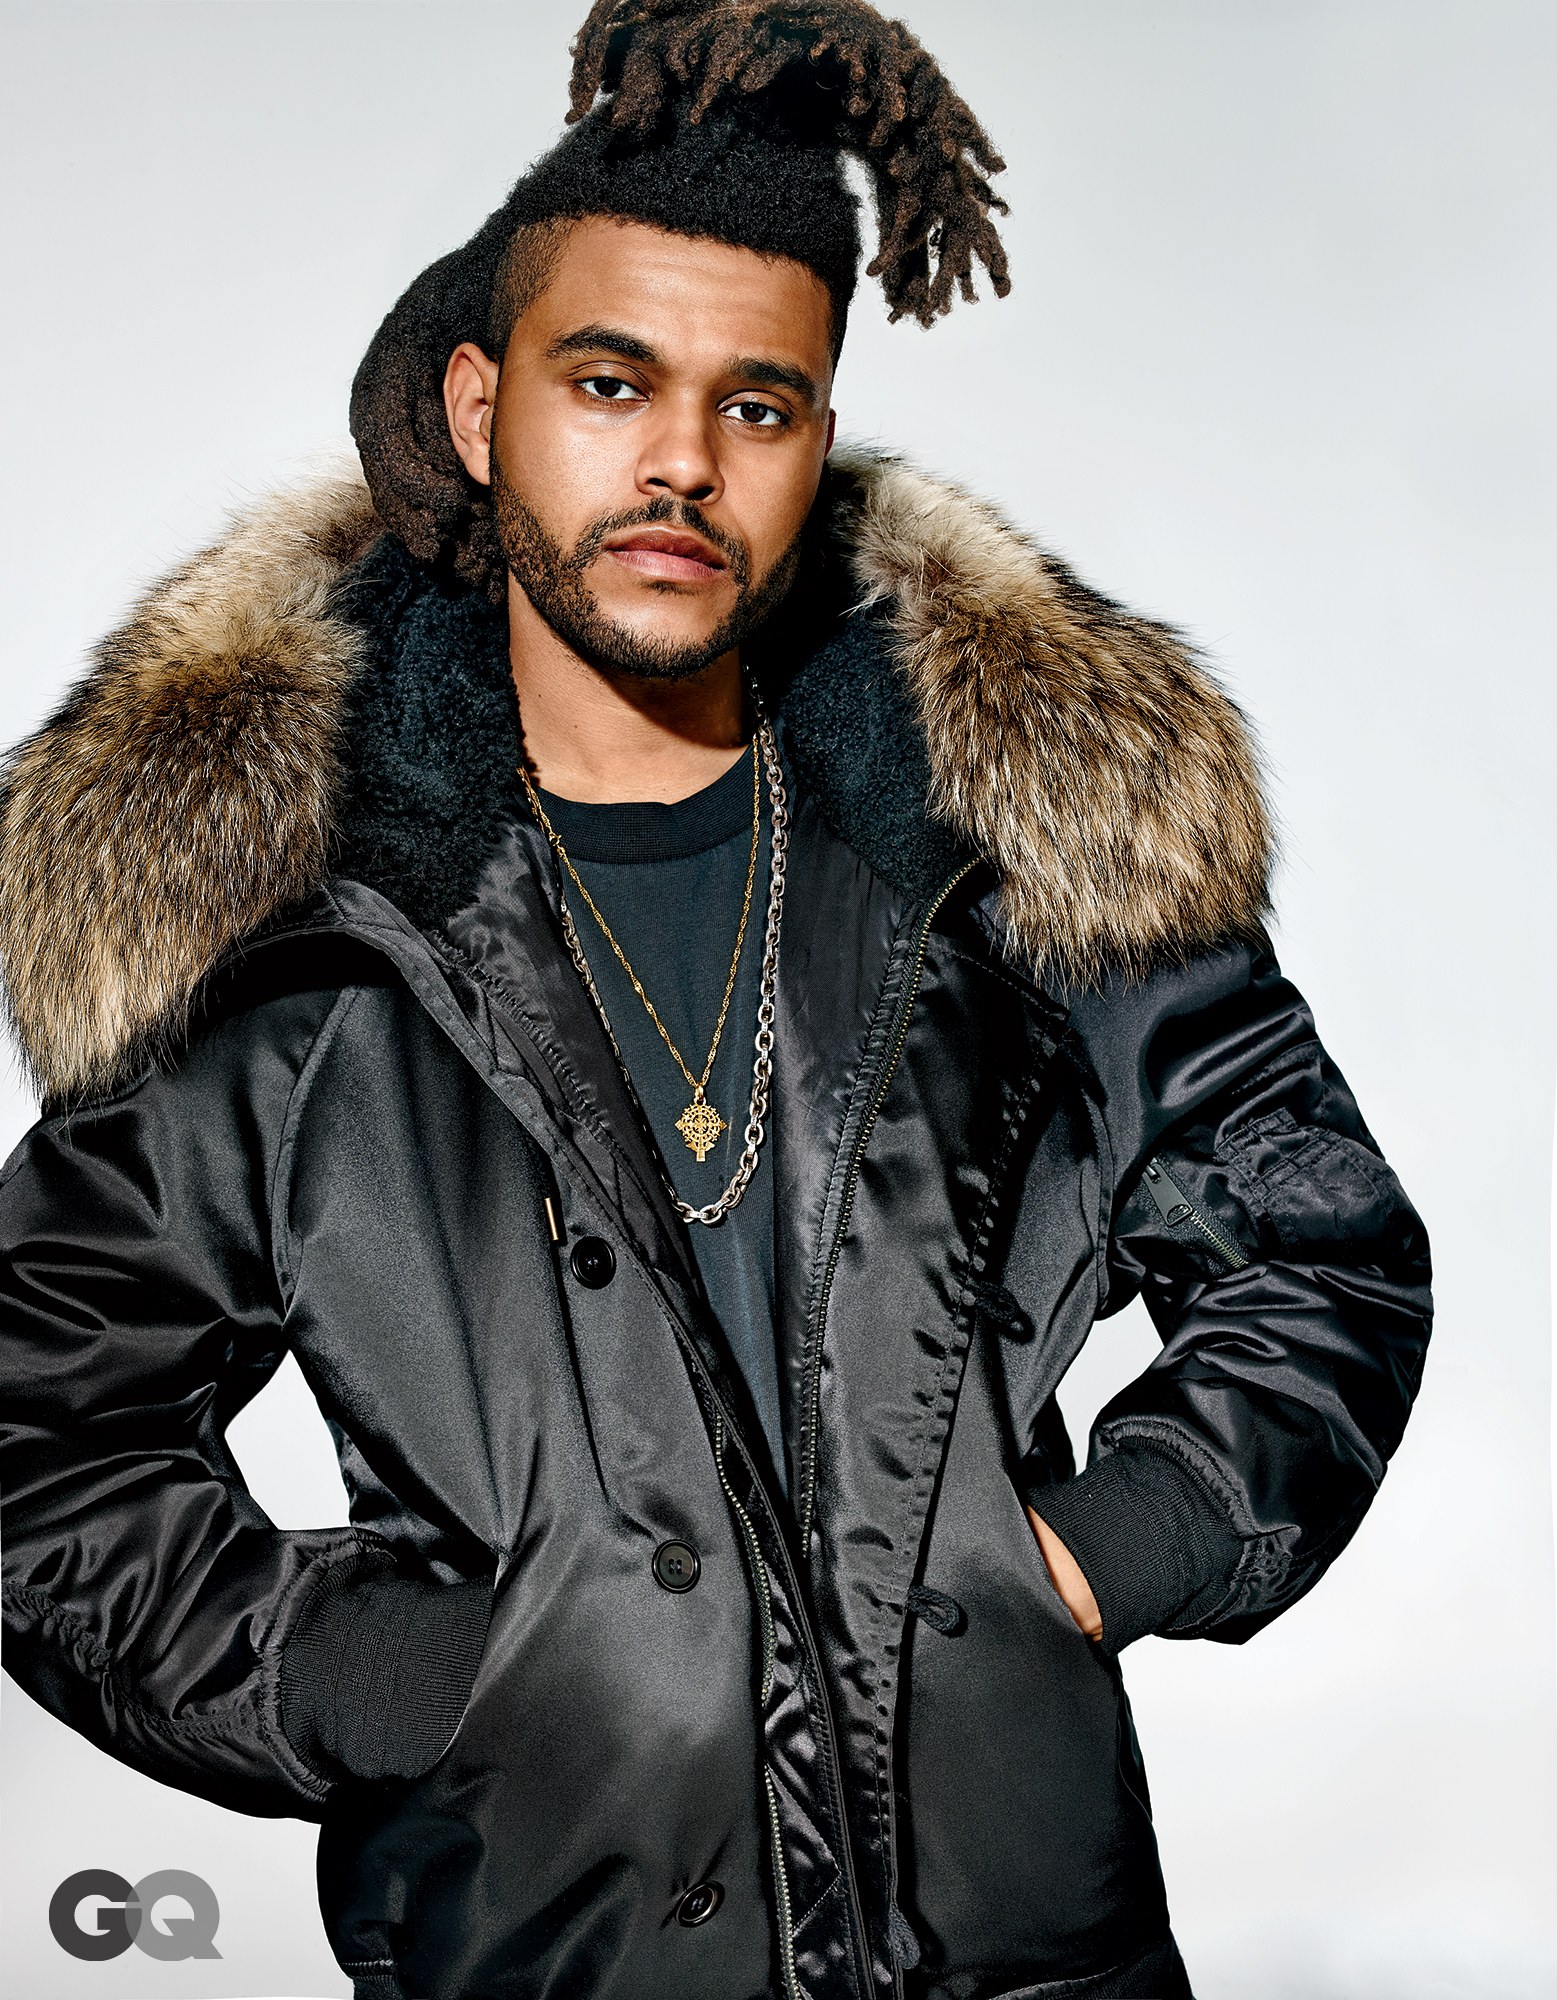 The Weeknd photo 16 of 43 pics, wallpaper - photo #905754 - ThePlace2